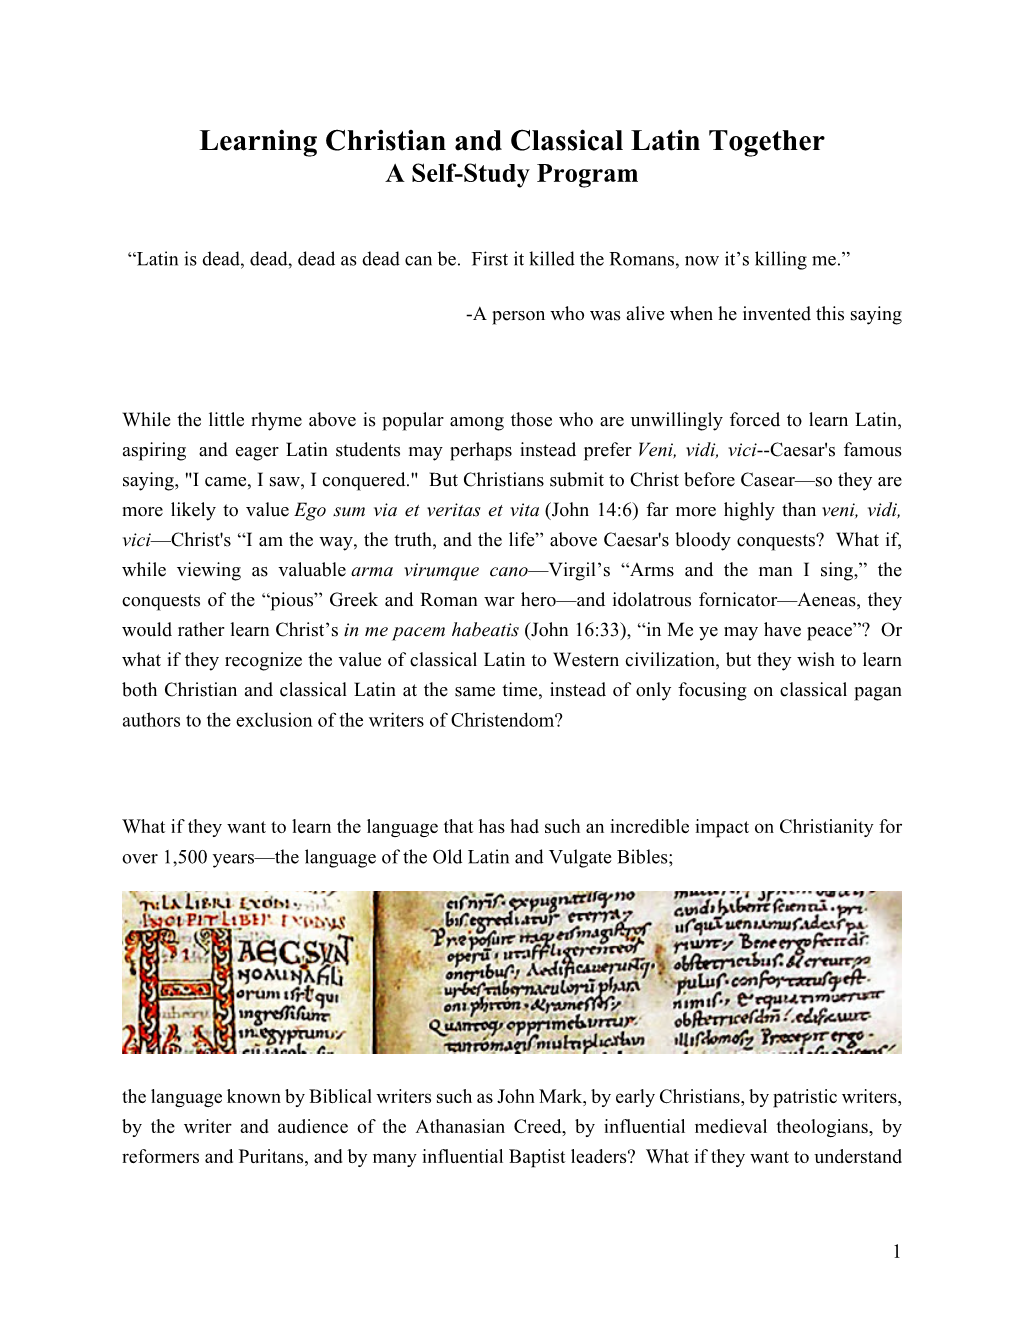 Learning Christian and Classical Latin Together a Self-Study Program